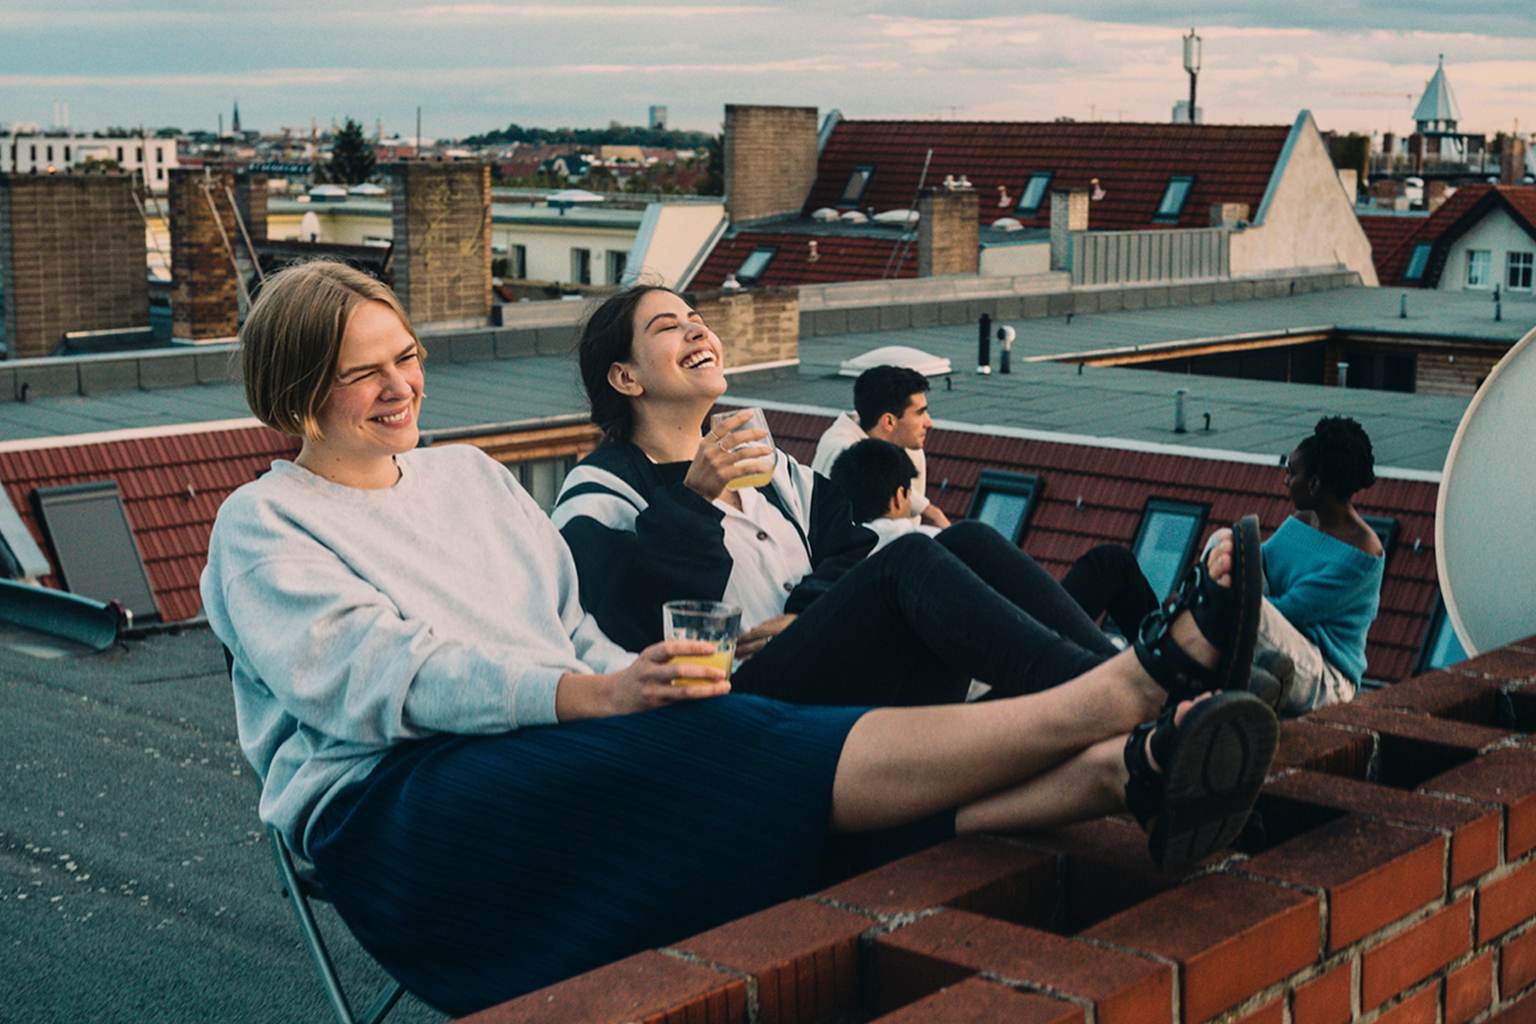 Two women sit laughing on a flat roof. They are both holding a drink in their hands. Three other people are sitting in the background.